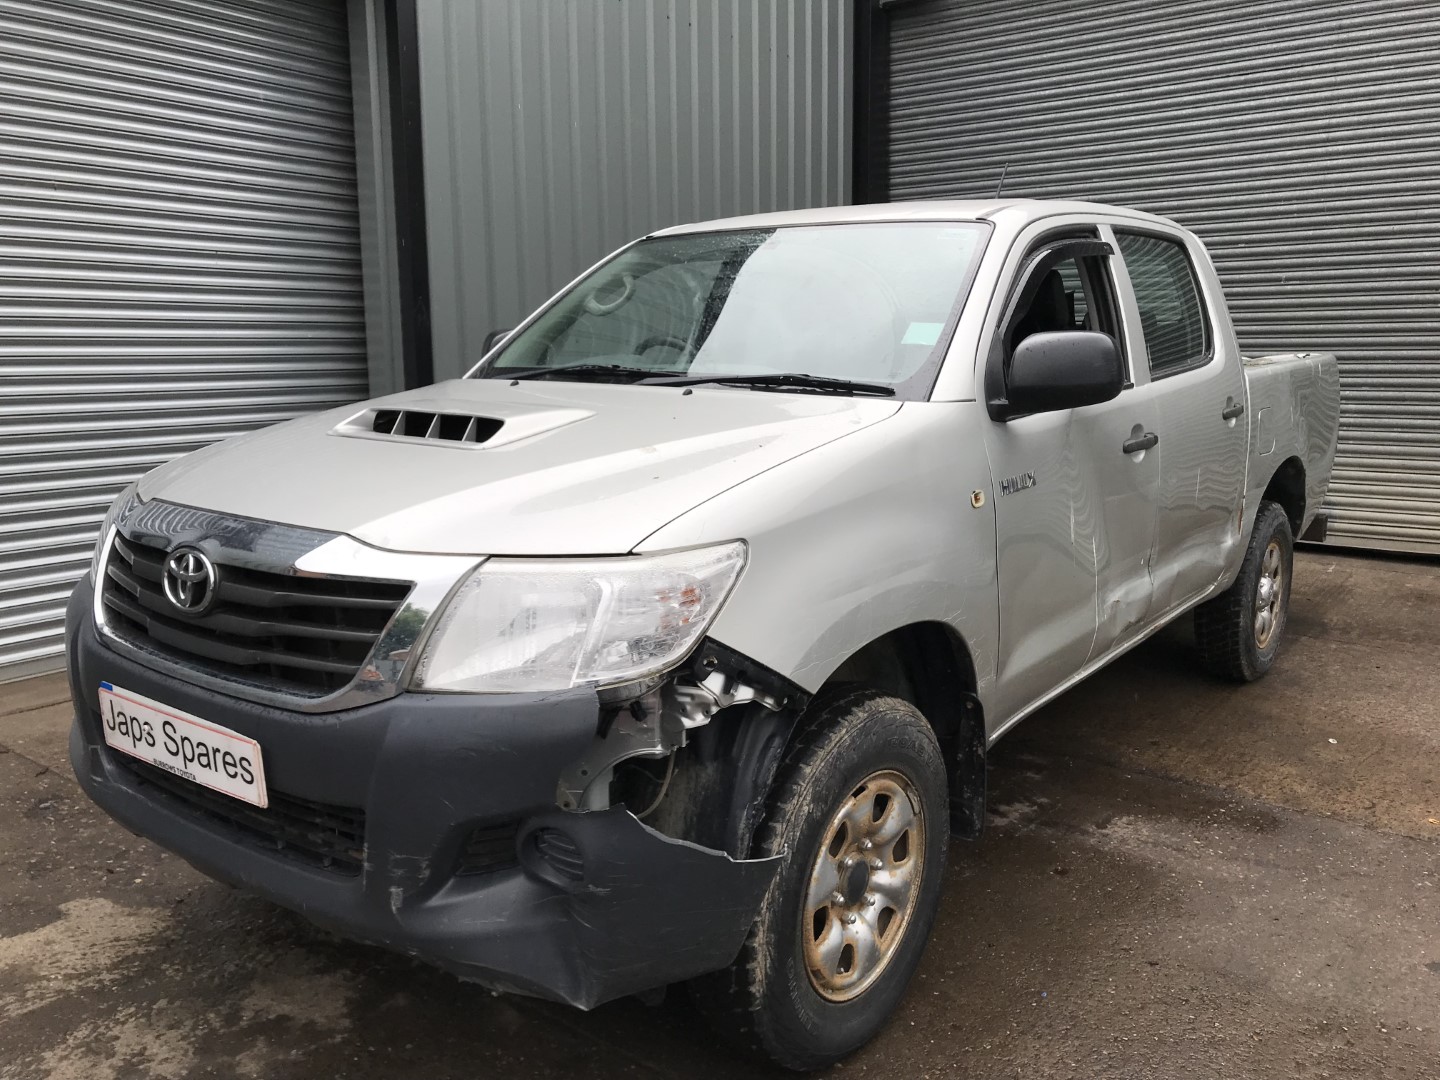 REF 274 TOYOTA HILUX DCB 2013 2.5D4D 5 SPEED MANUAL